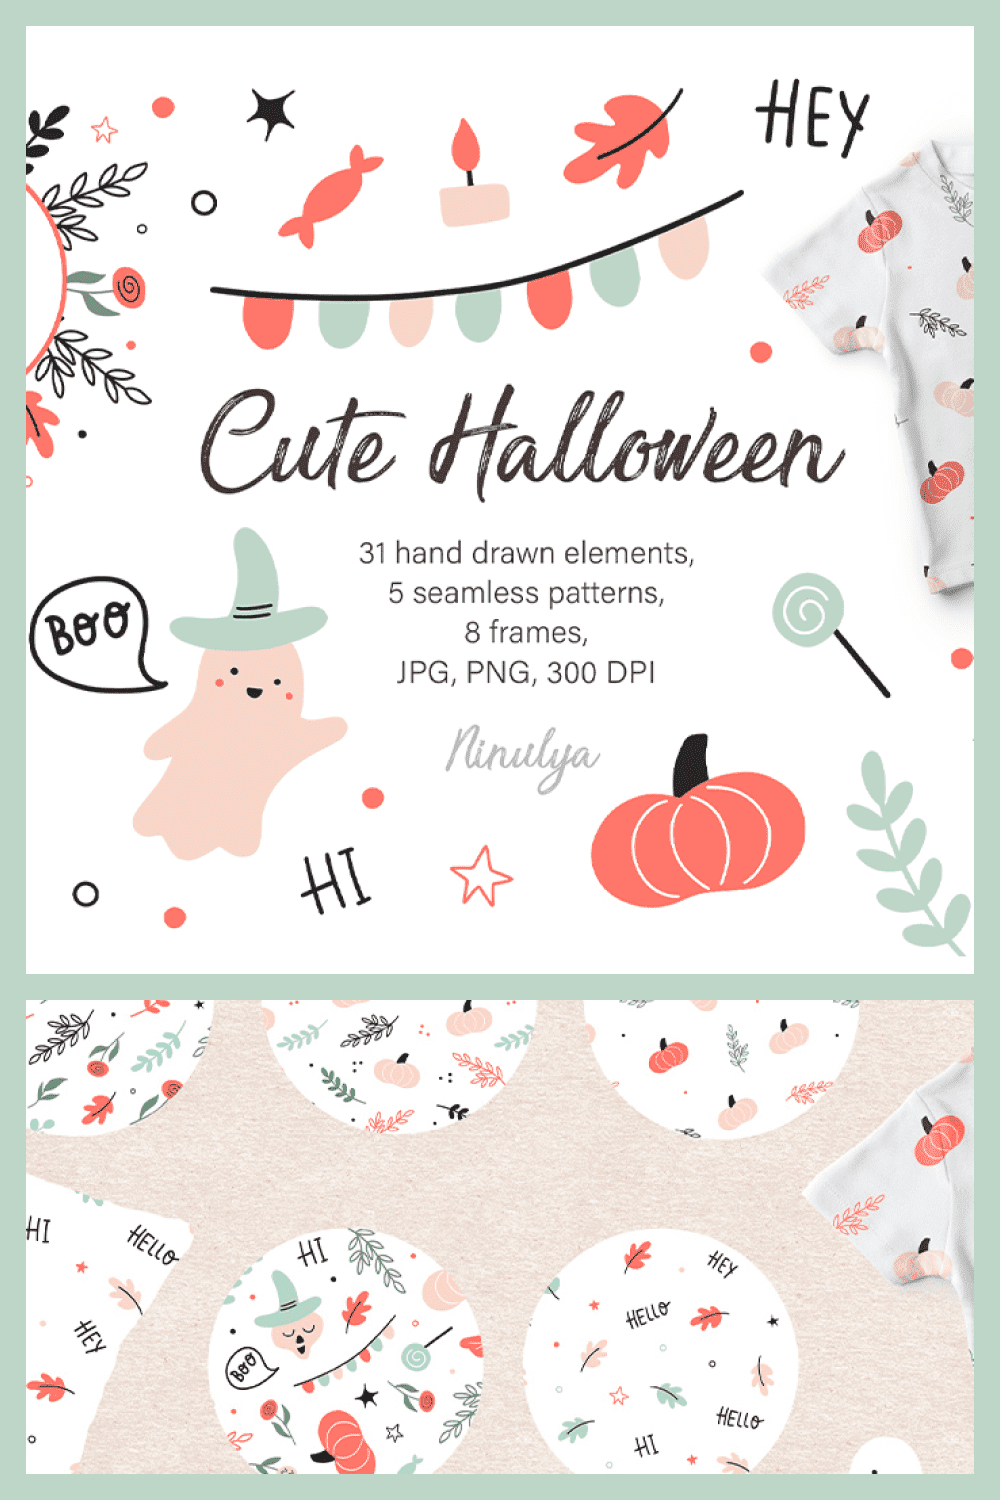 These are delicate and cute illustrations for the celebration of Halloween.